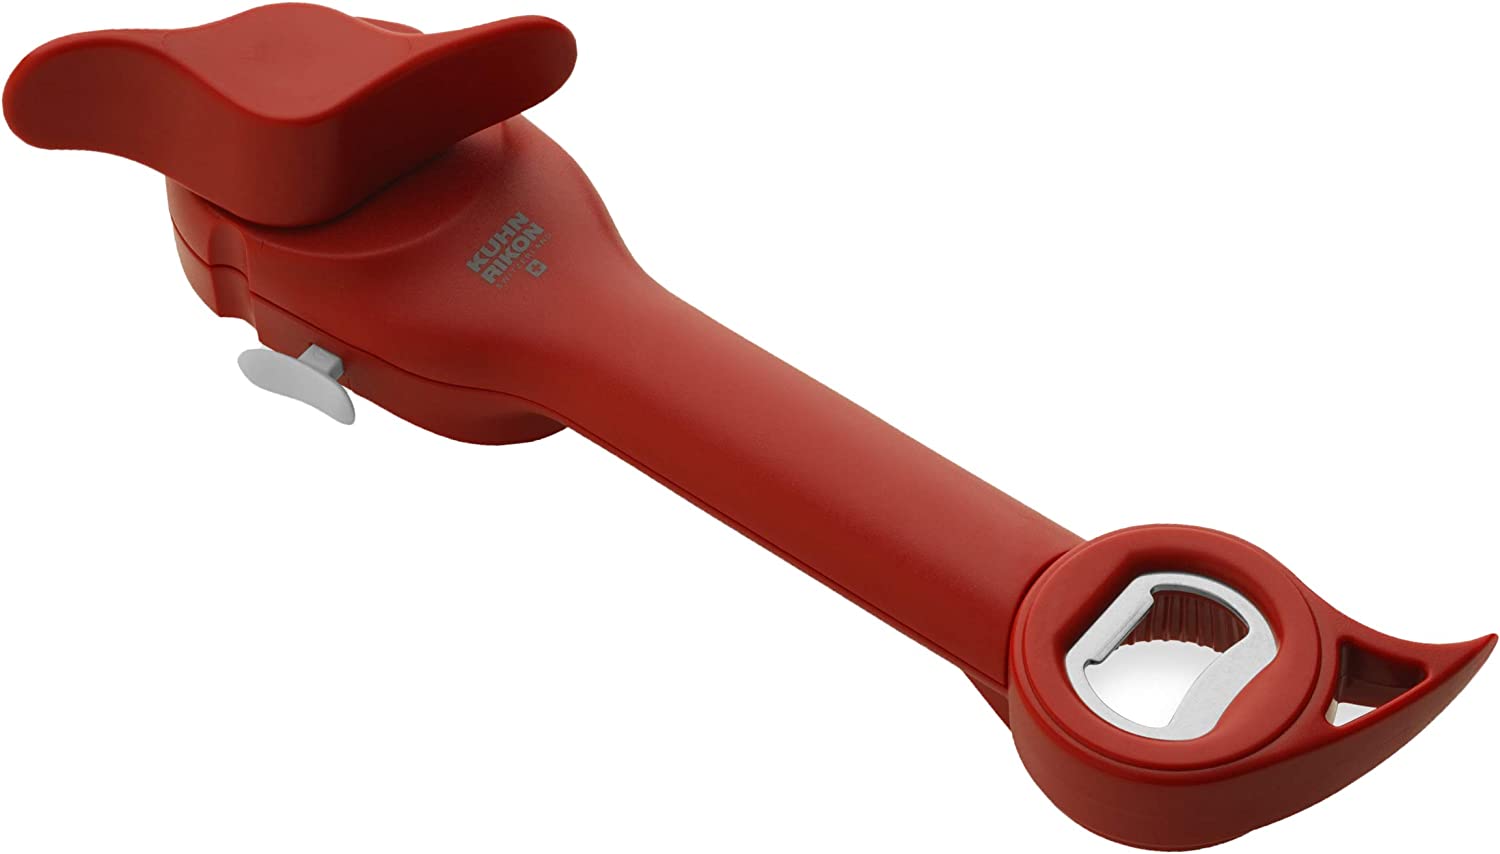 Kuhn Rikon Auto Safety Master Opener for Cans